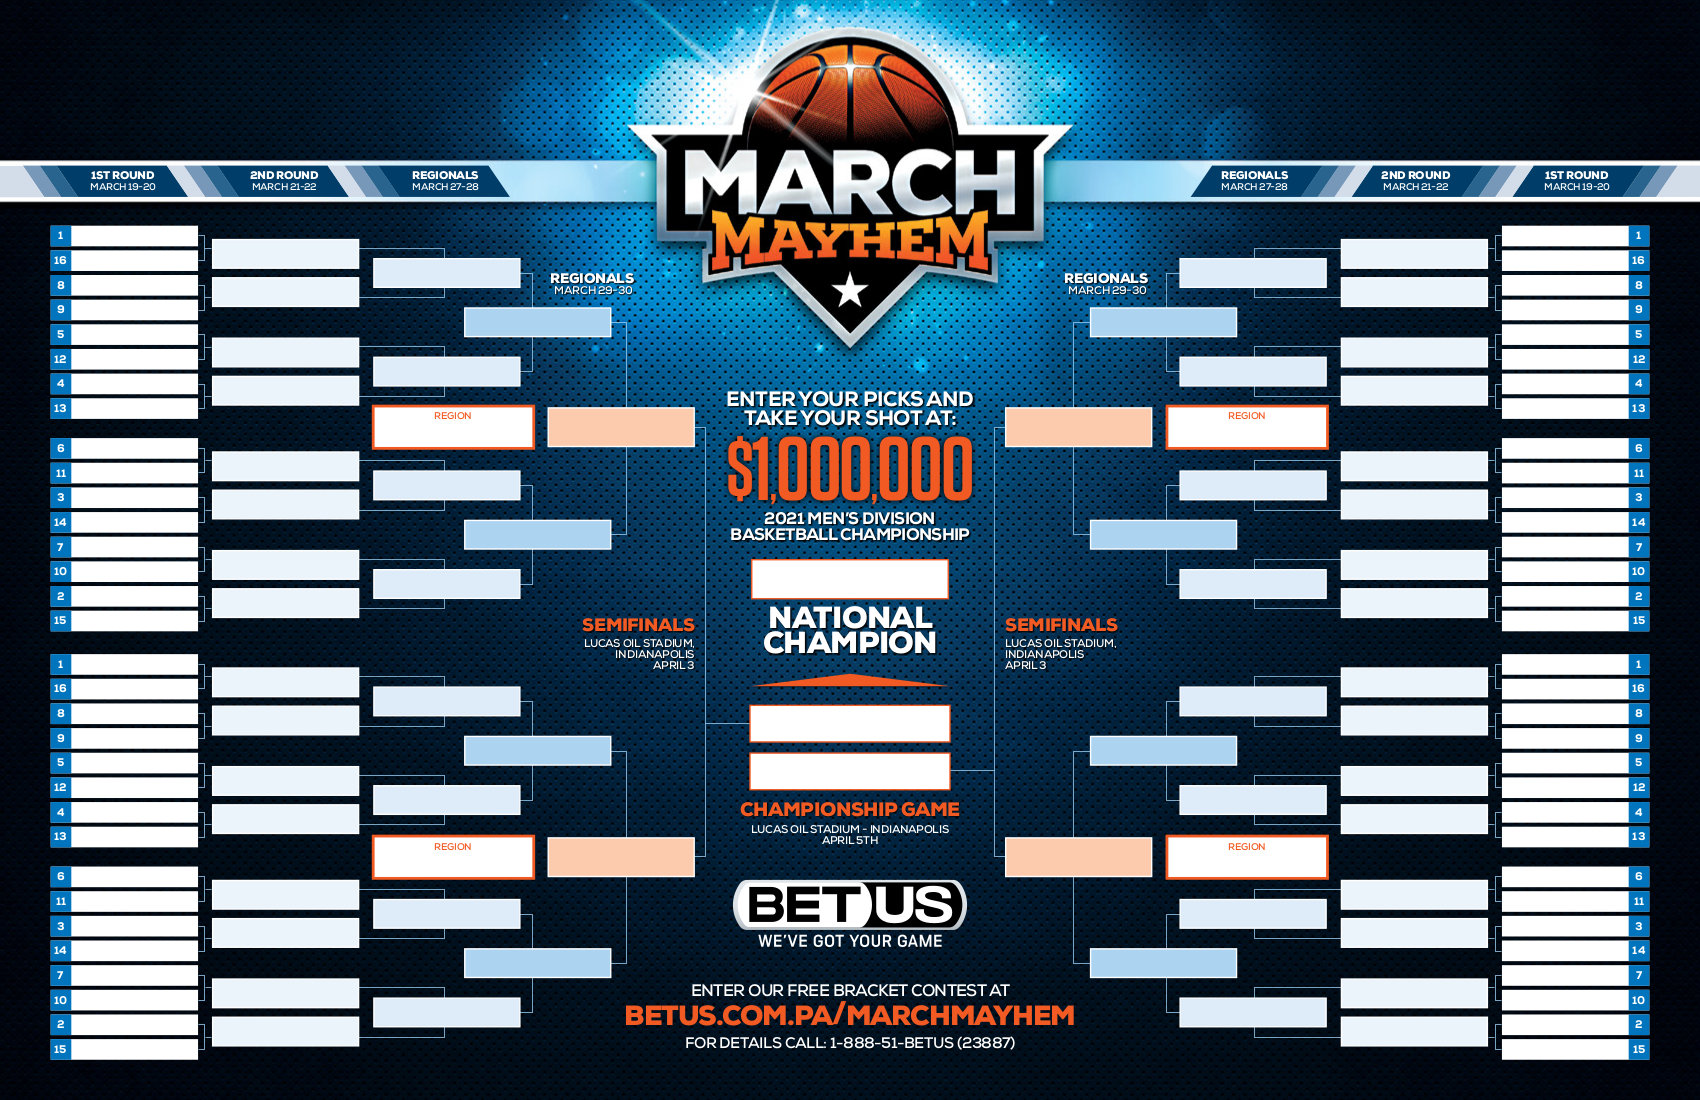 Win a Million for the Perfect NCAA Tournament Bracket